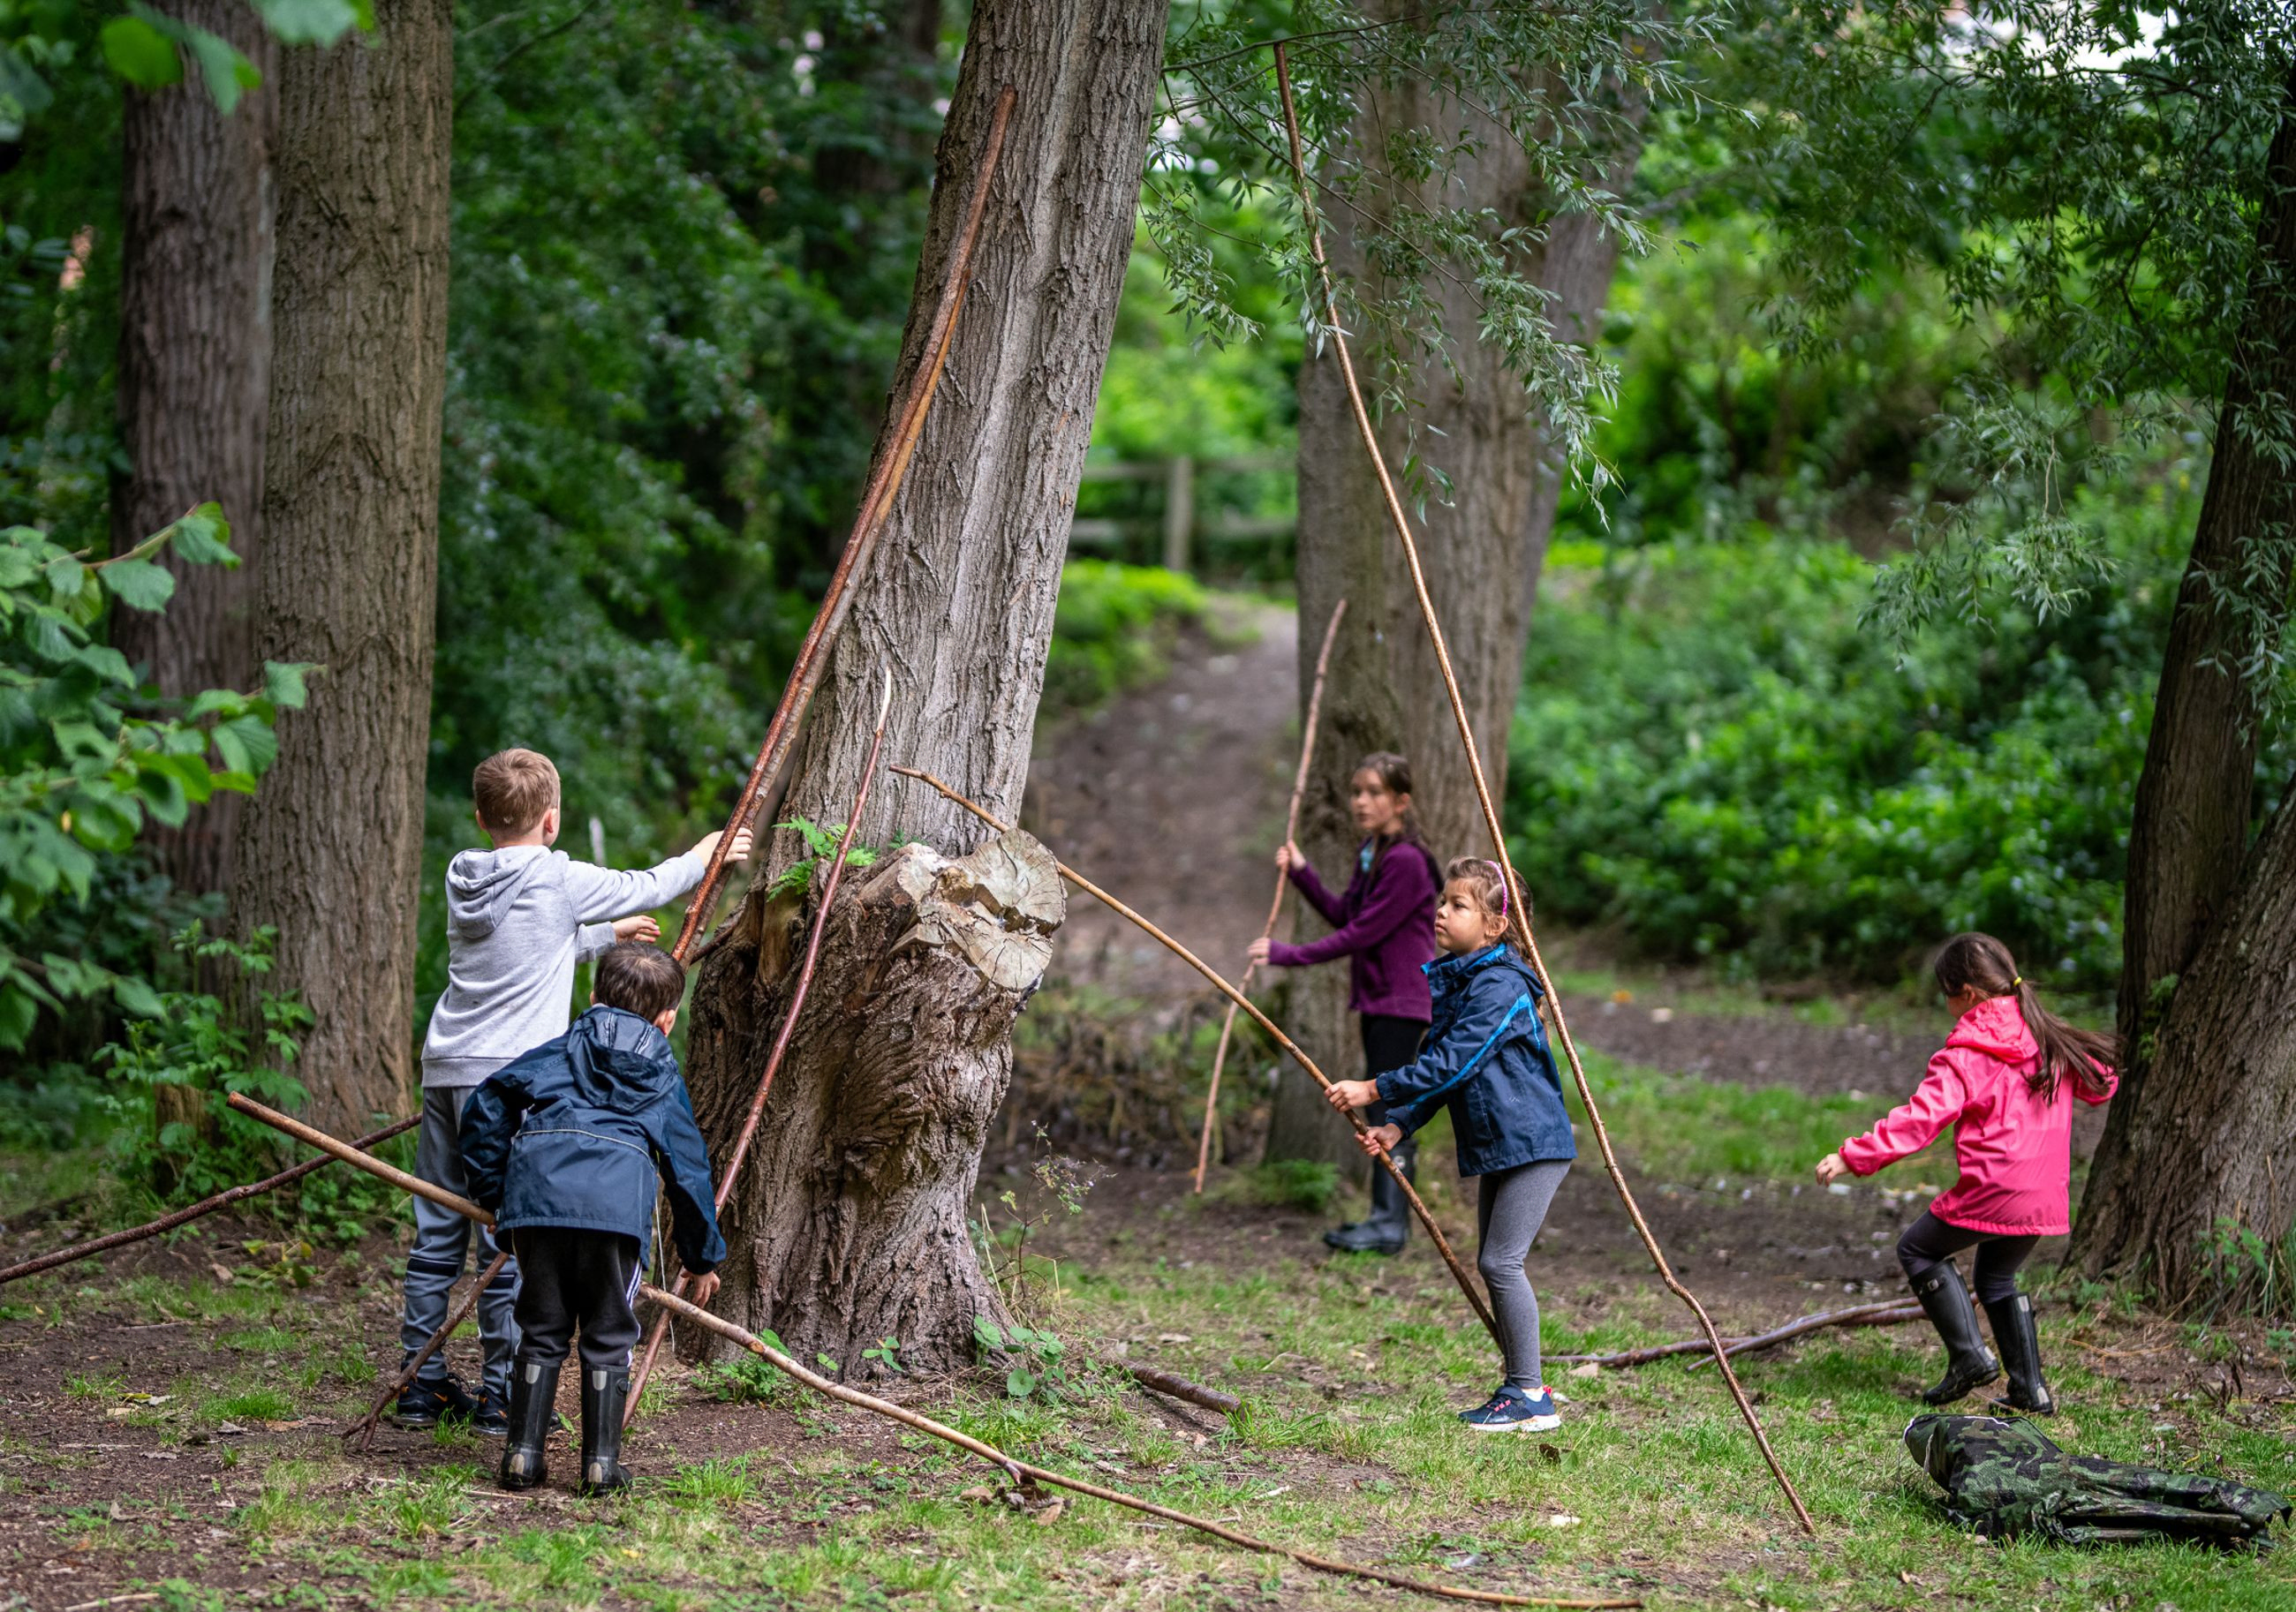 Children building a fort with sticks